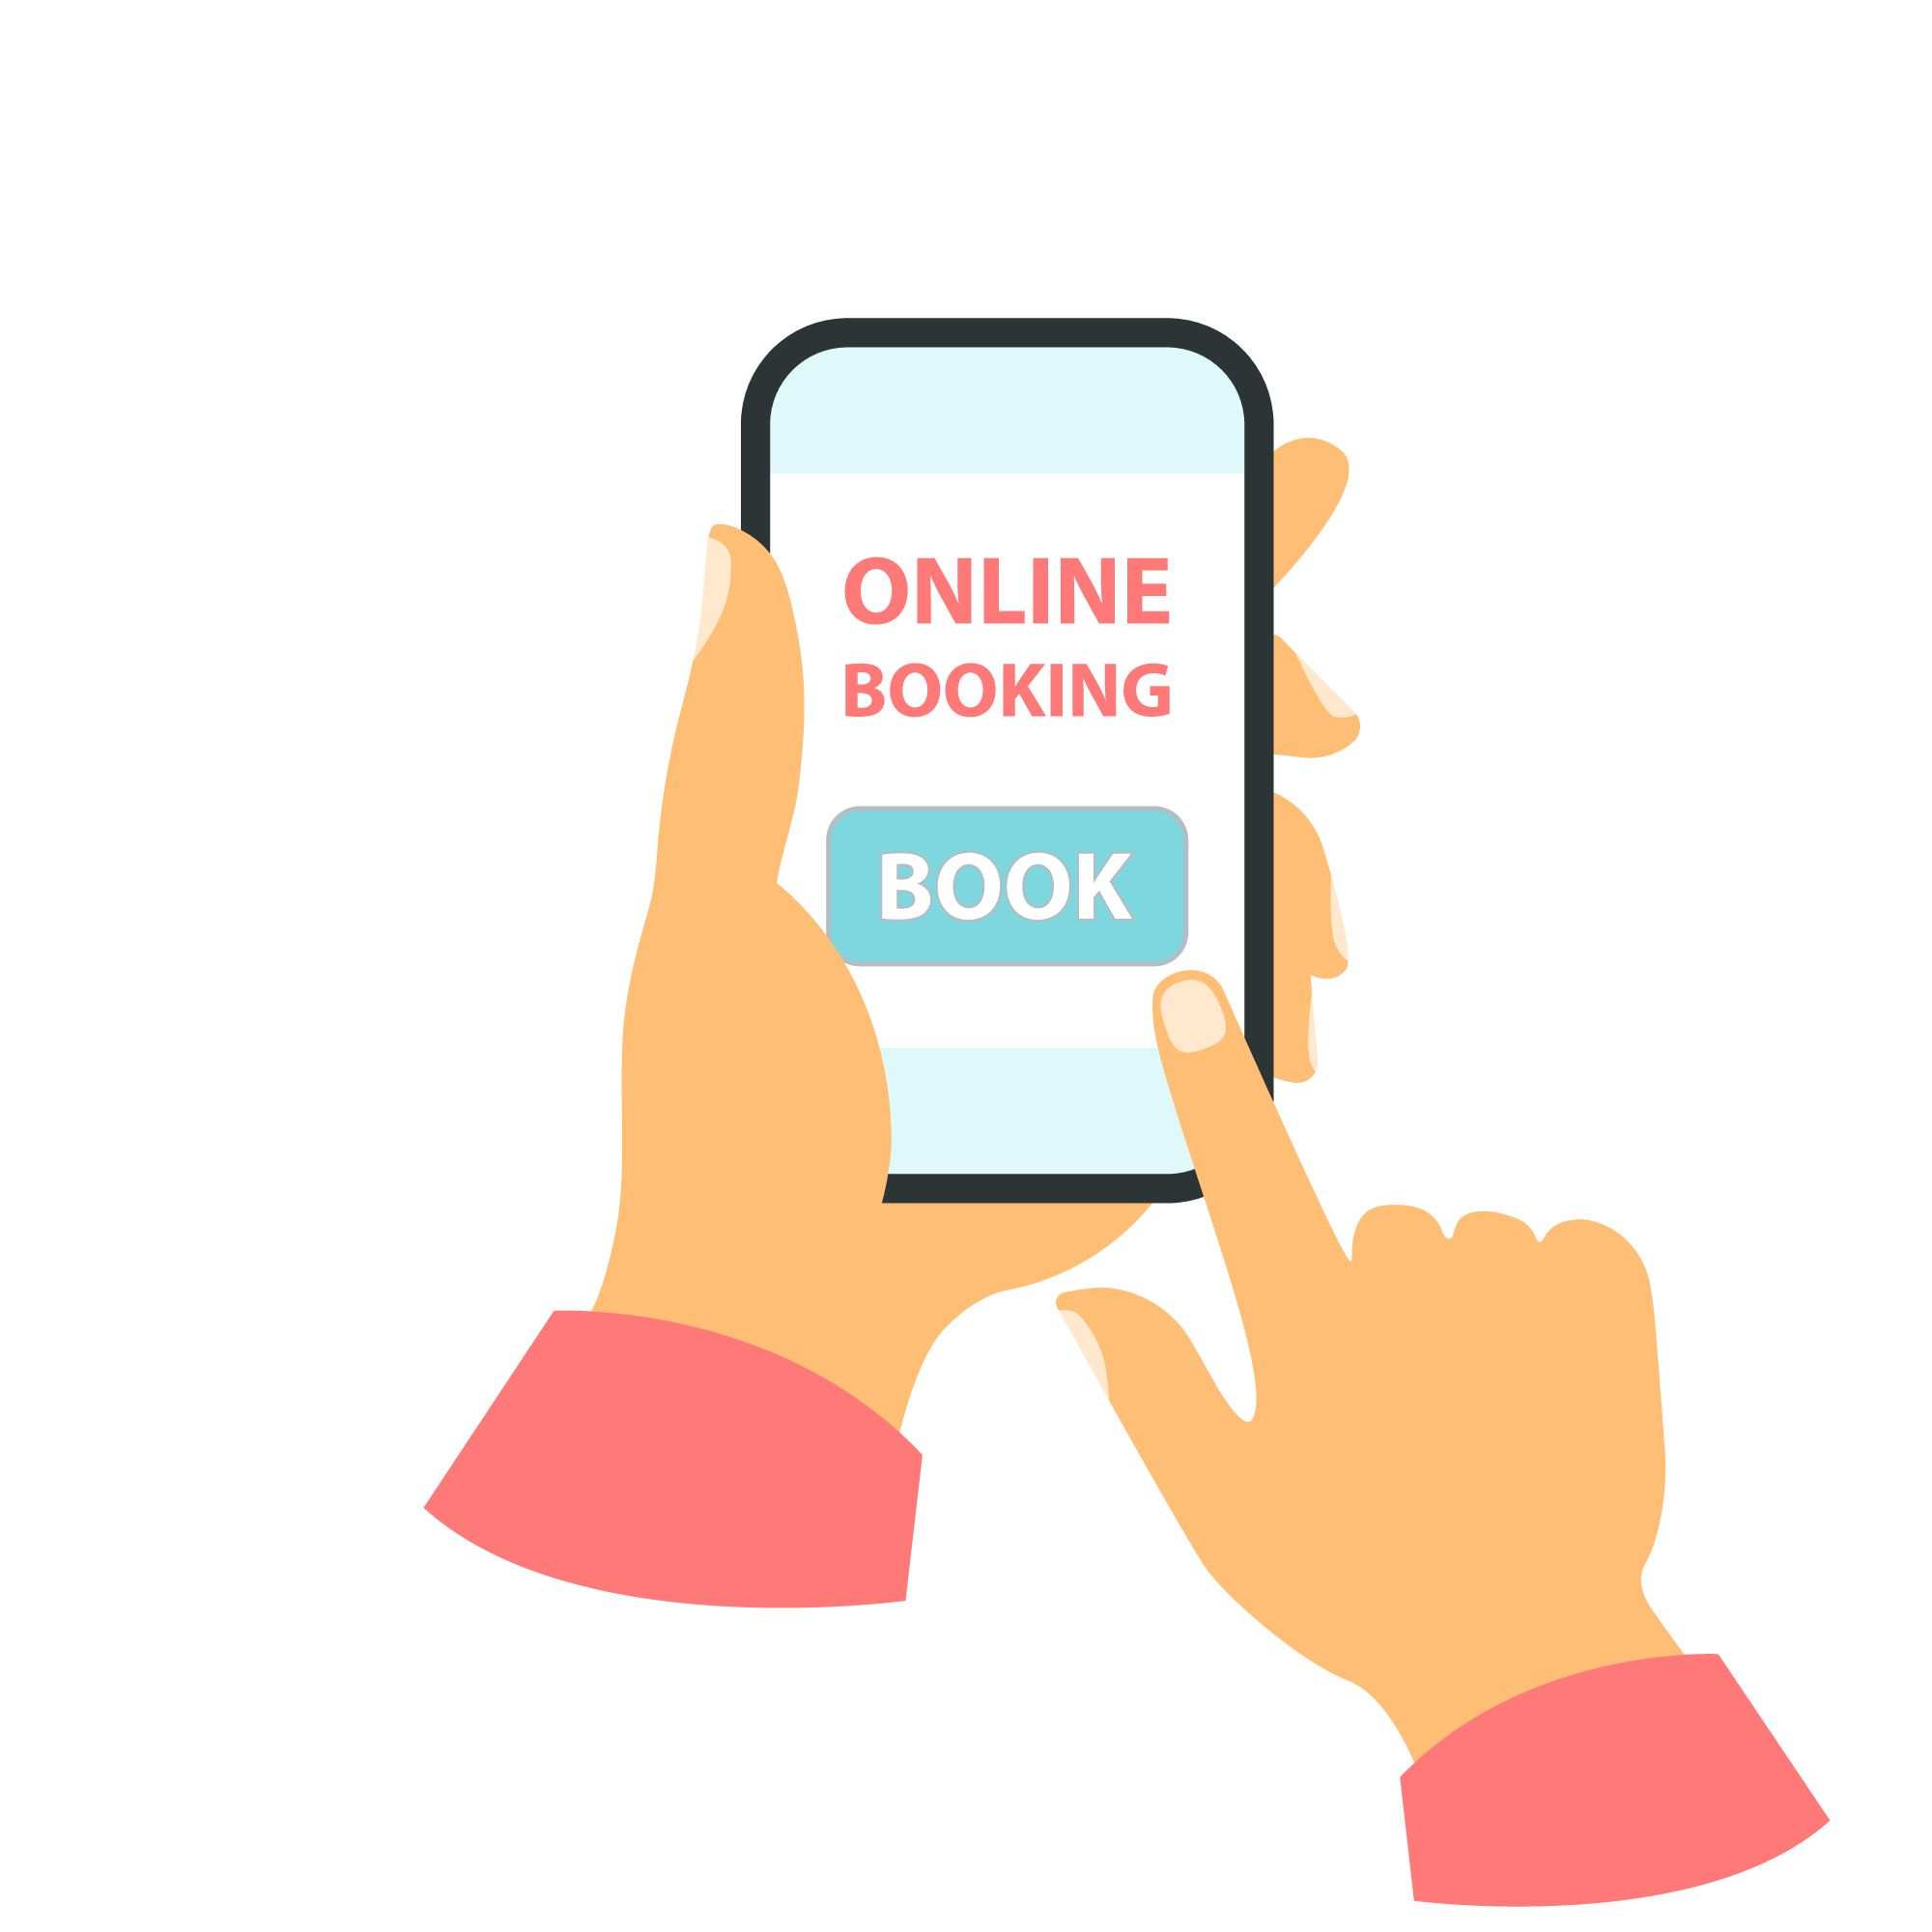 How Online Booking Helps Businesses Modernize and Innovate